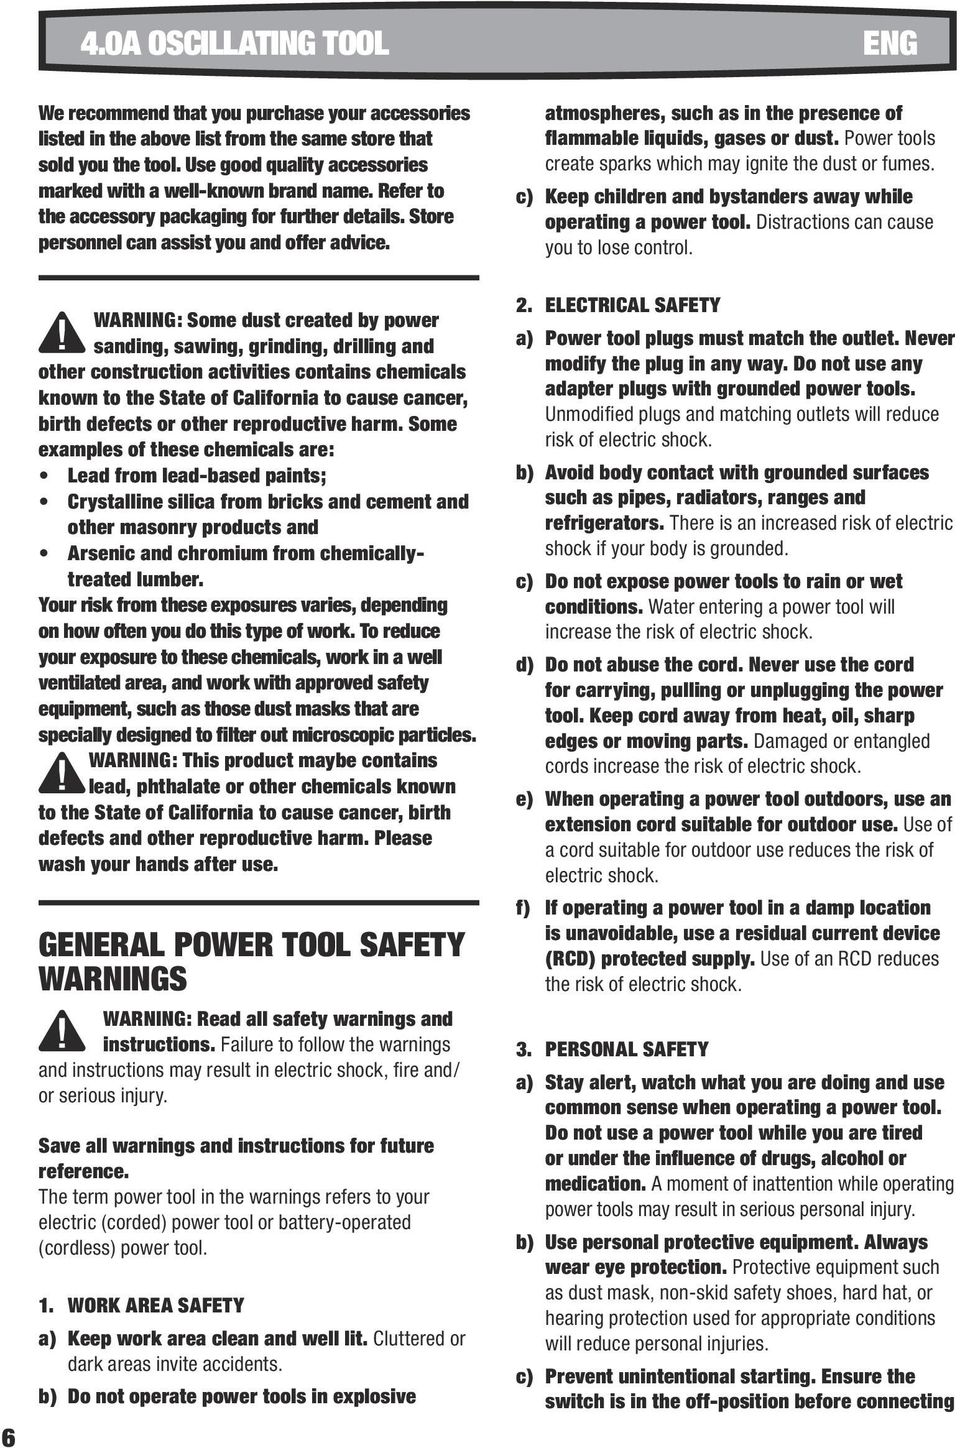 WARNING: Some dust created by power sanding, sawing, grinding, drilling and other construction activities contains chemicals known to the State of California to cause cancer, birth defects or other